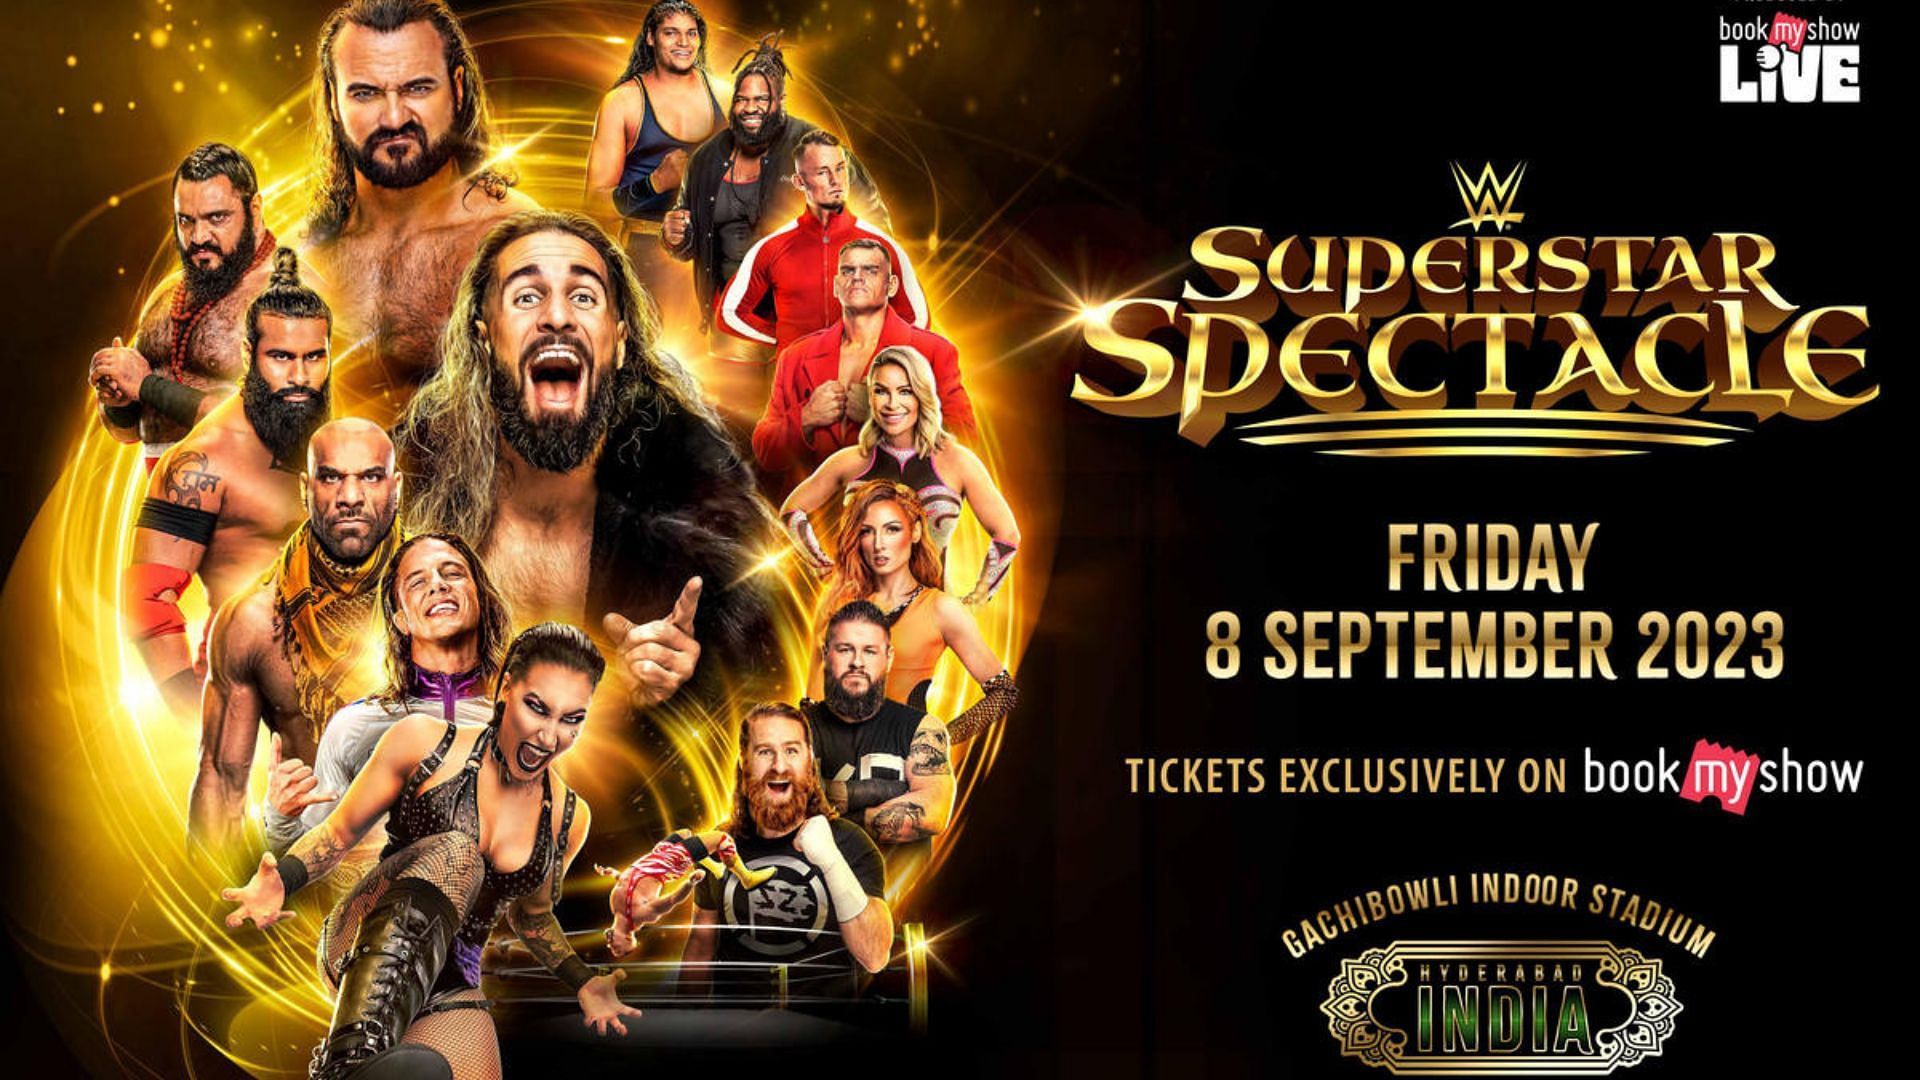 WWE Update on where to watch WWE Superstar Spectacle live from India